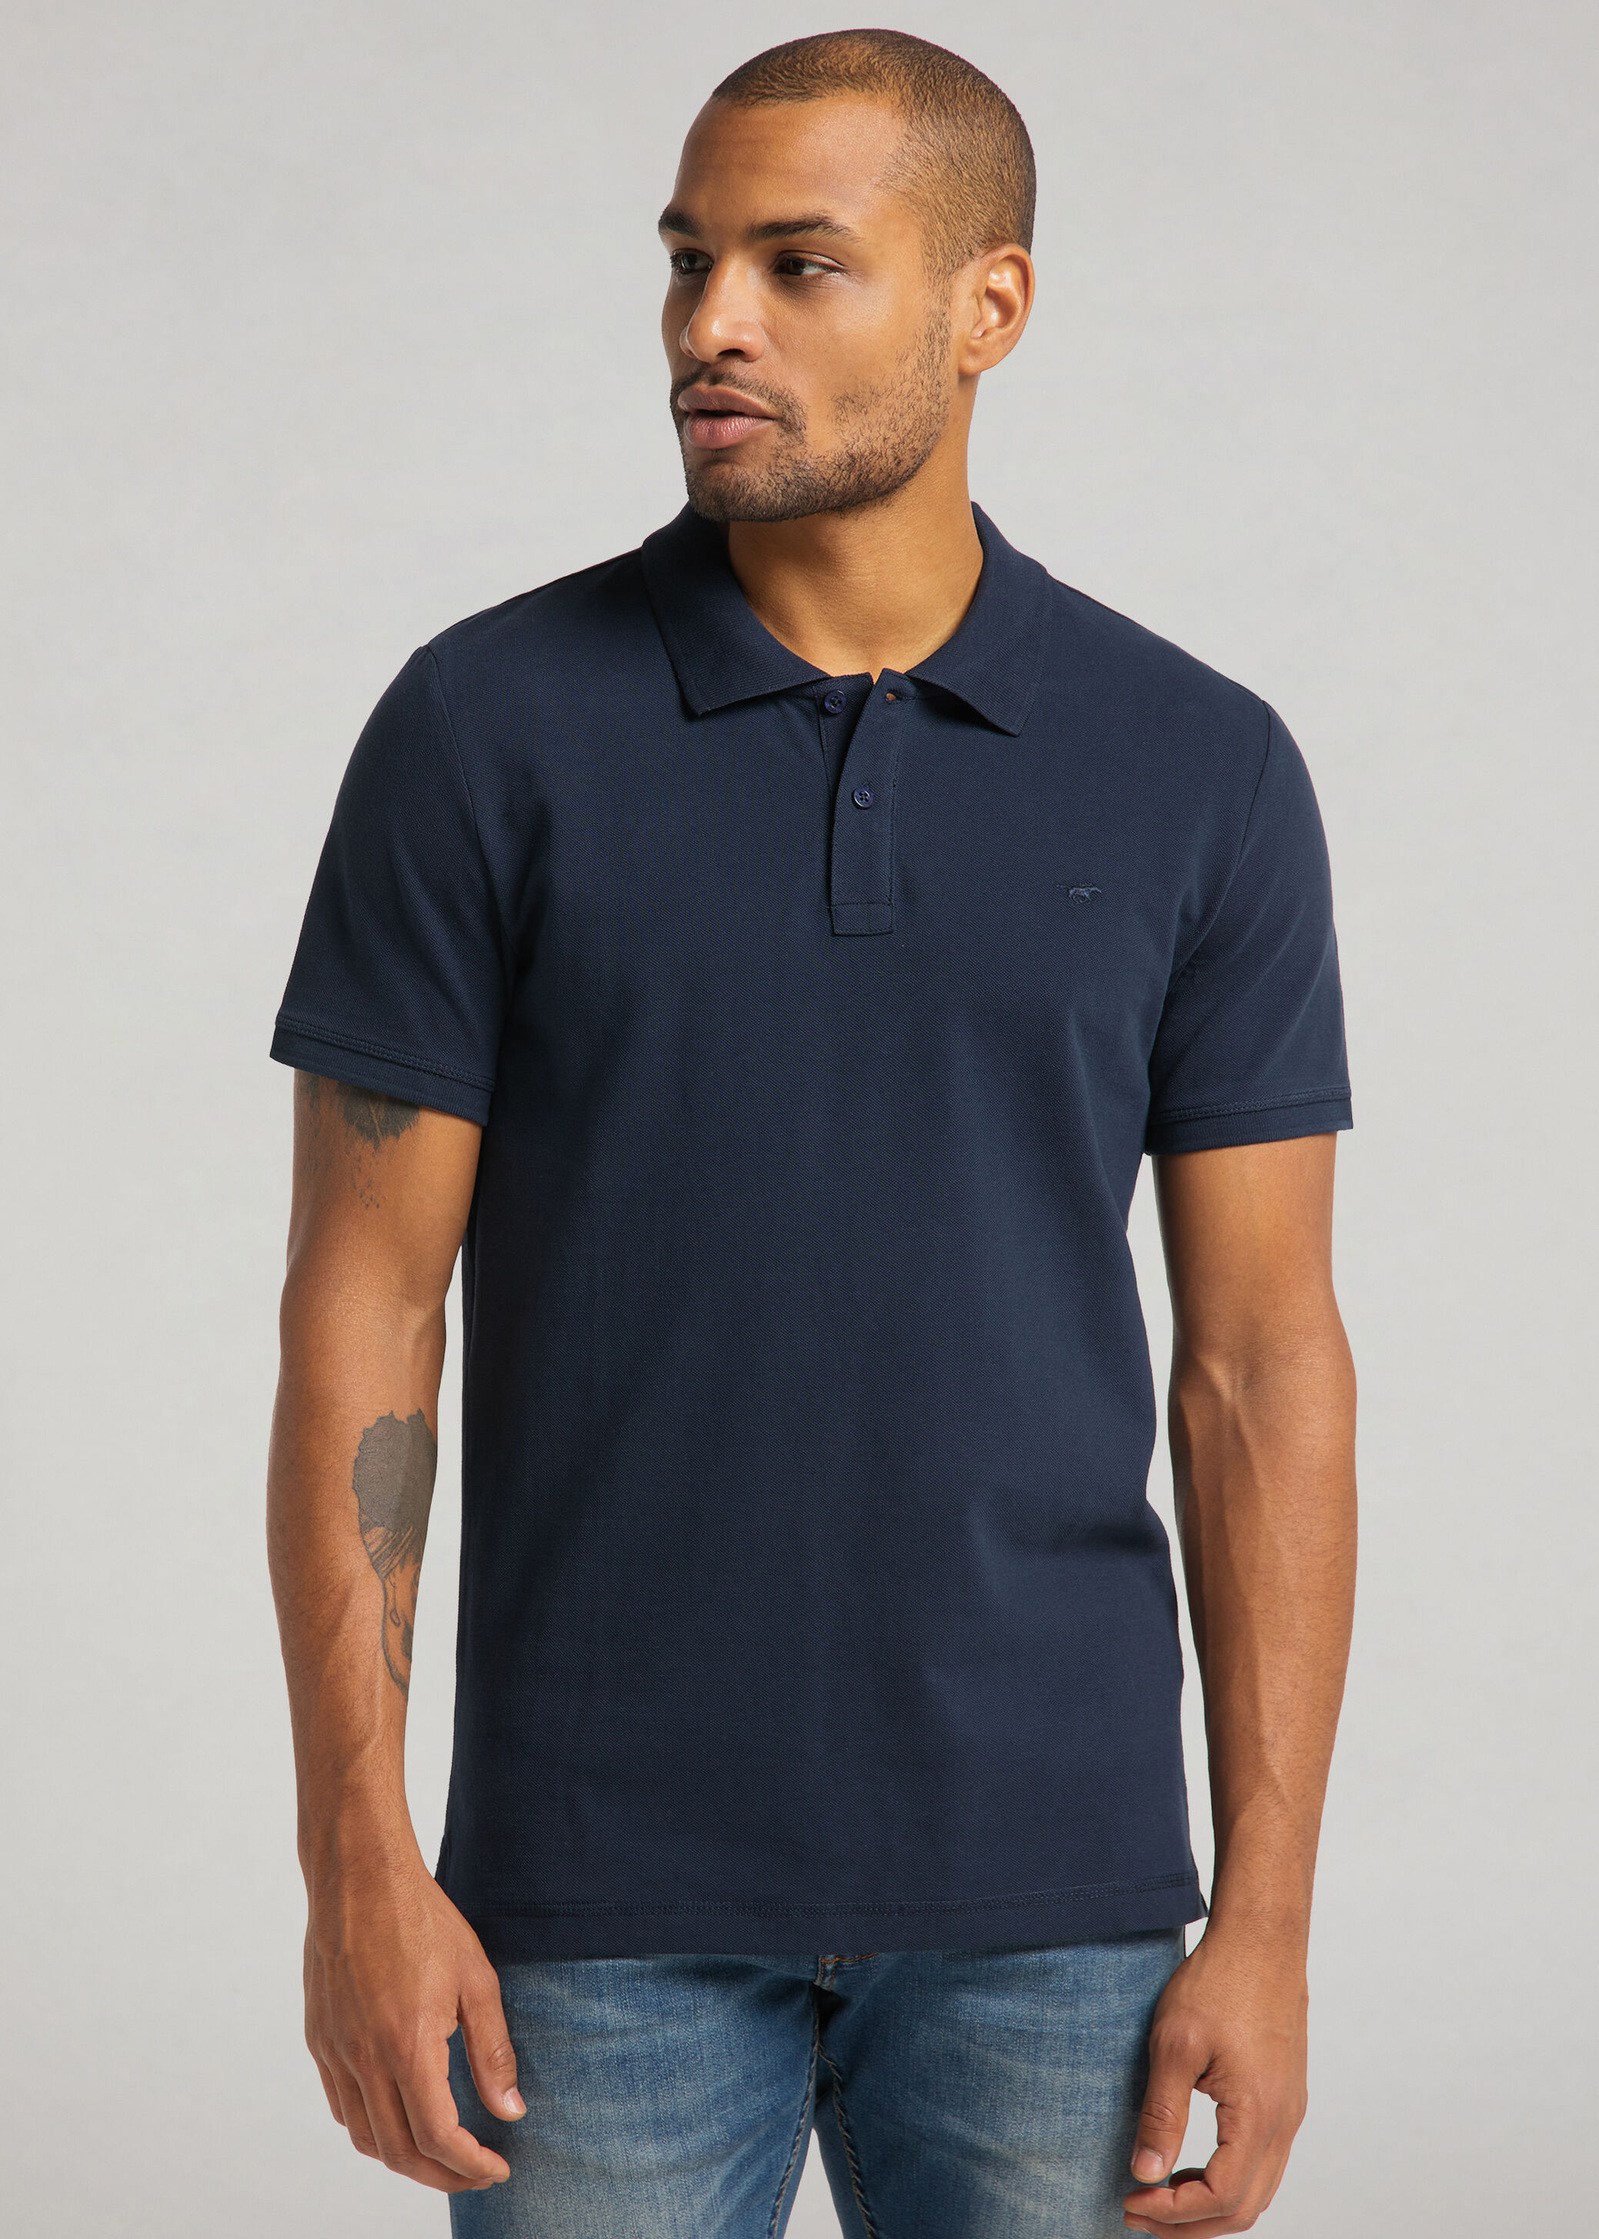 Sapphire - Mustang Polo Size 1008810-4136 Dark M